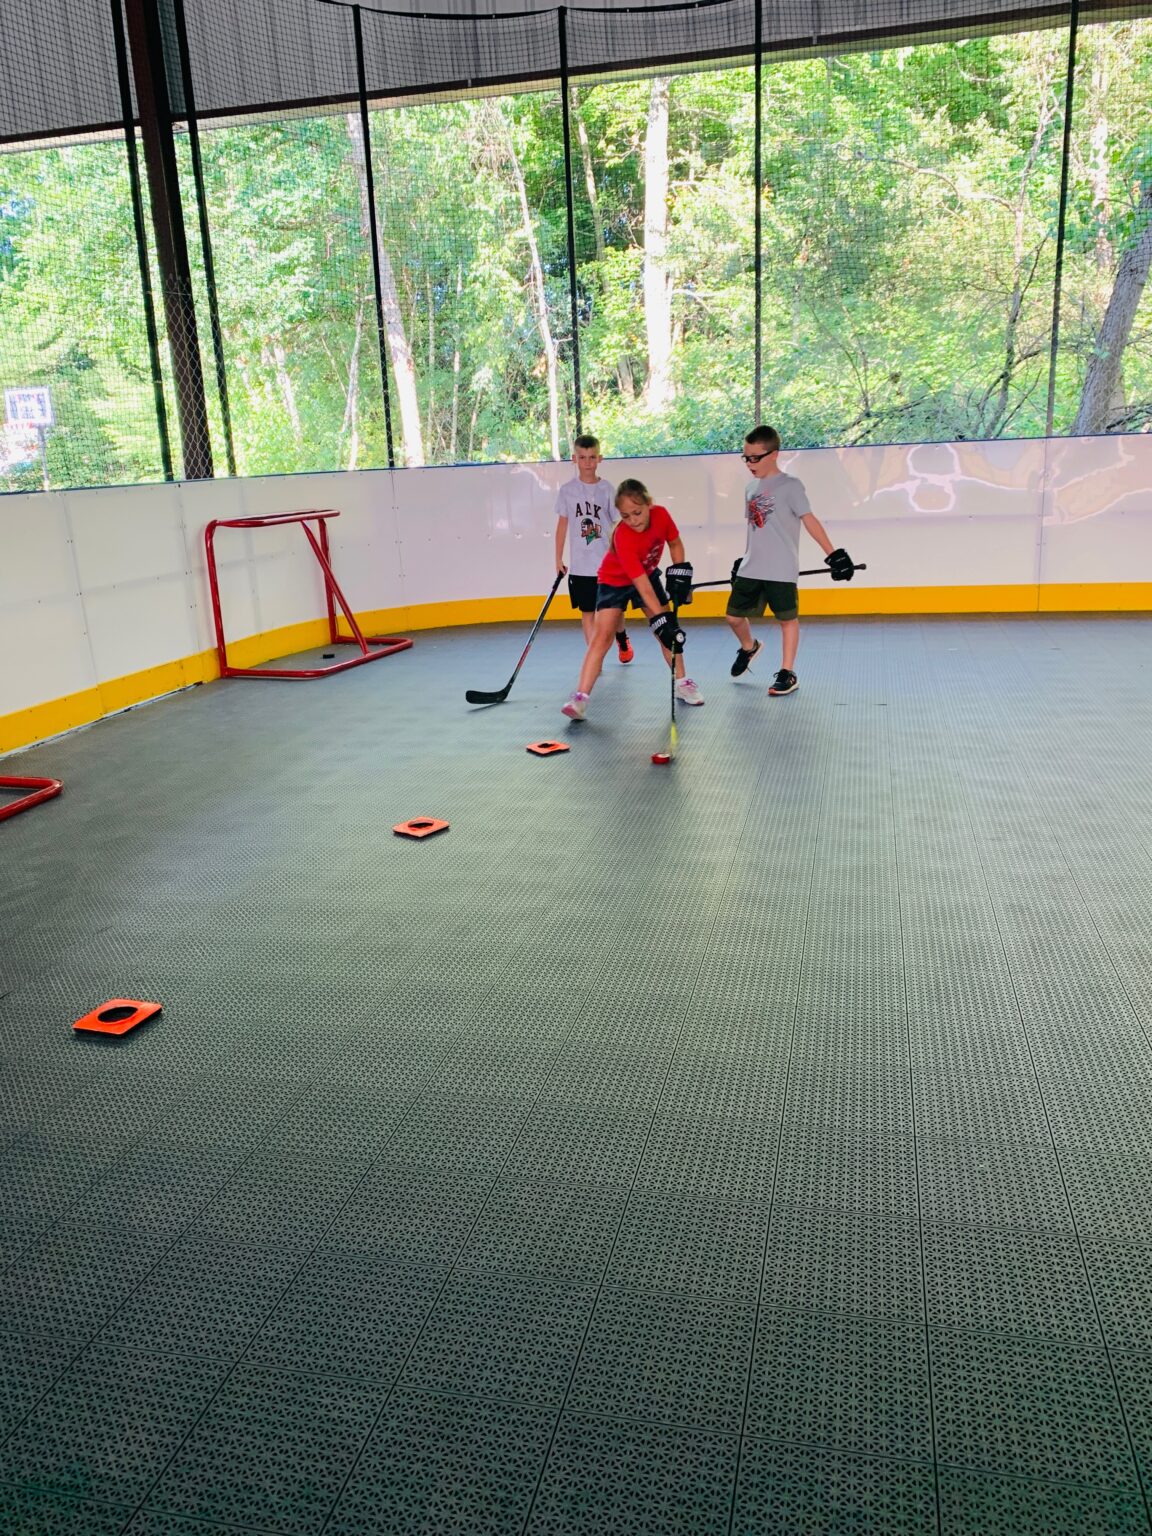 Hockey Summer Camps for Kids Register Today